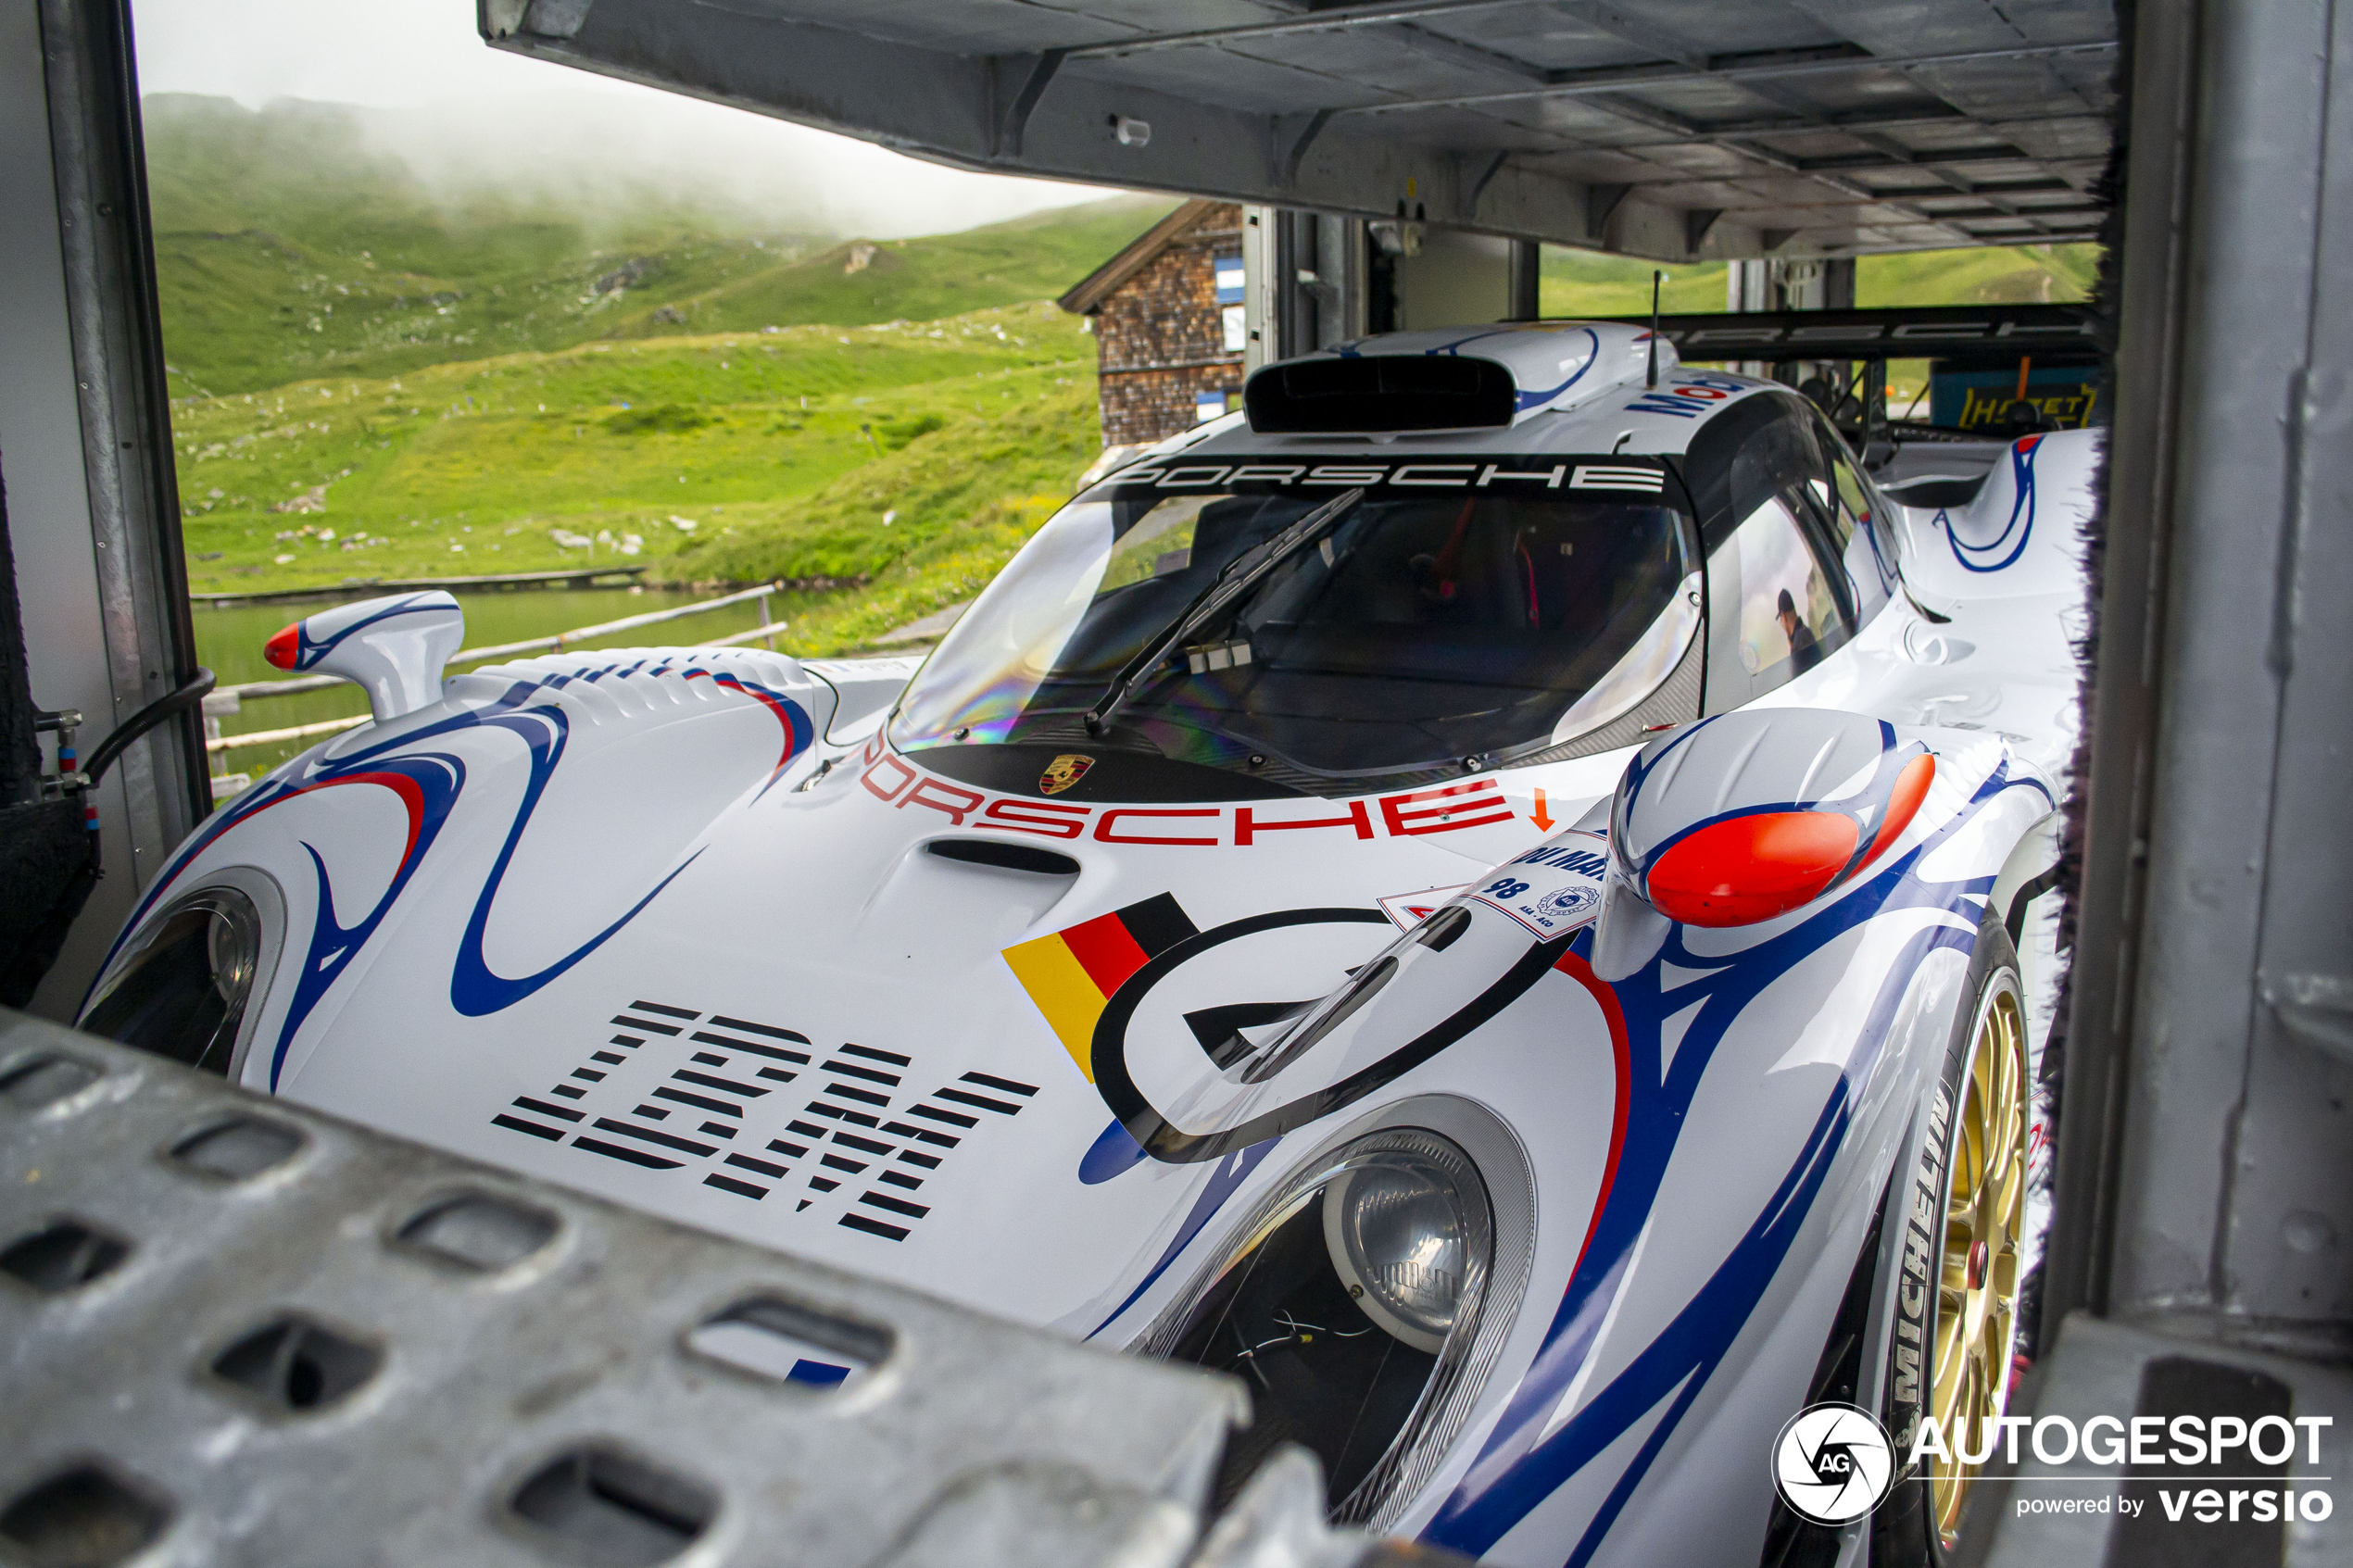 Another GT1 on the Grossglockner